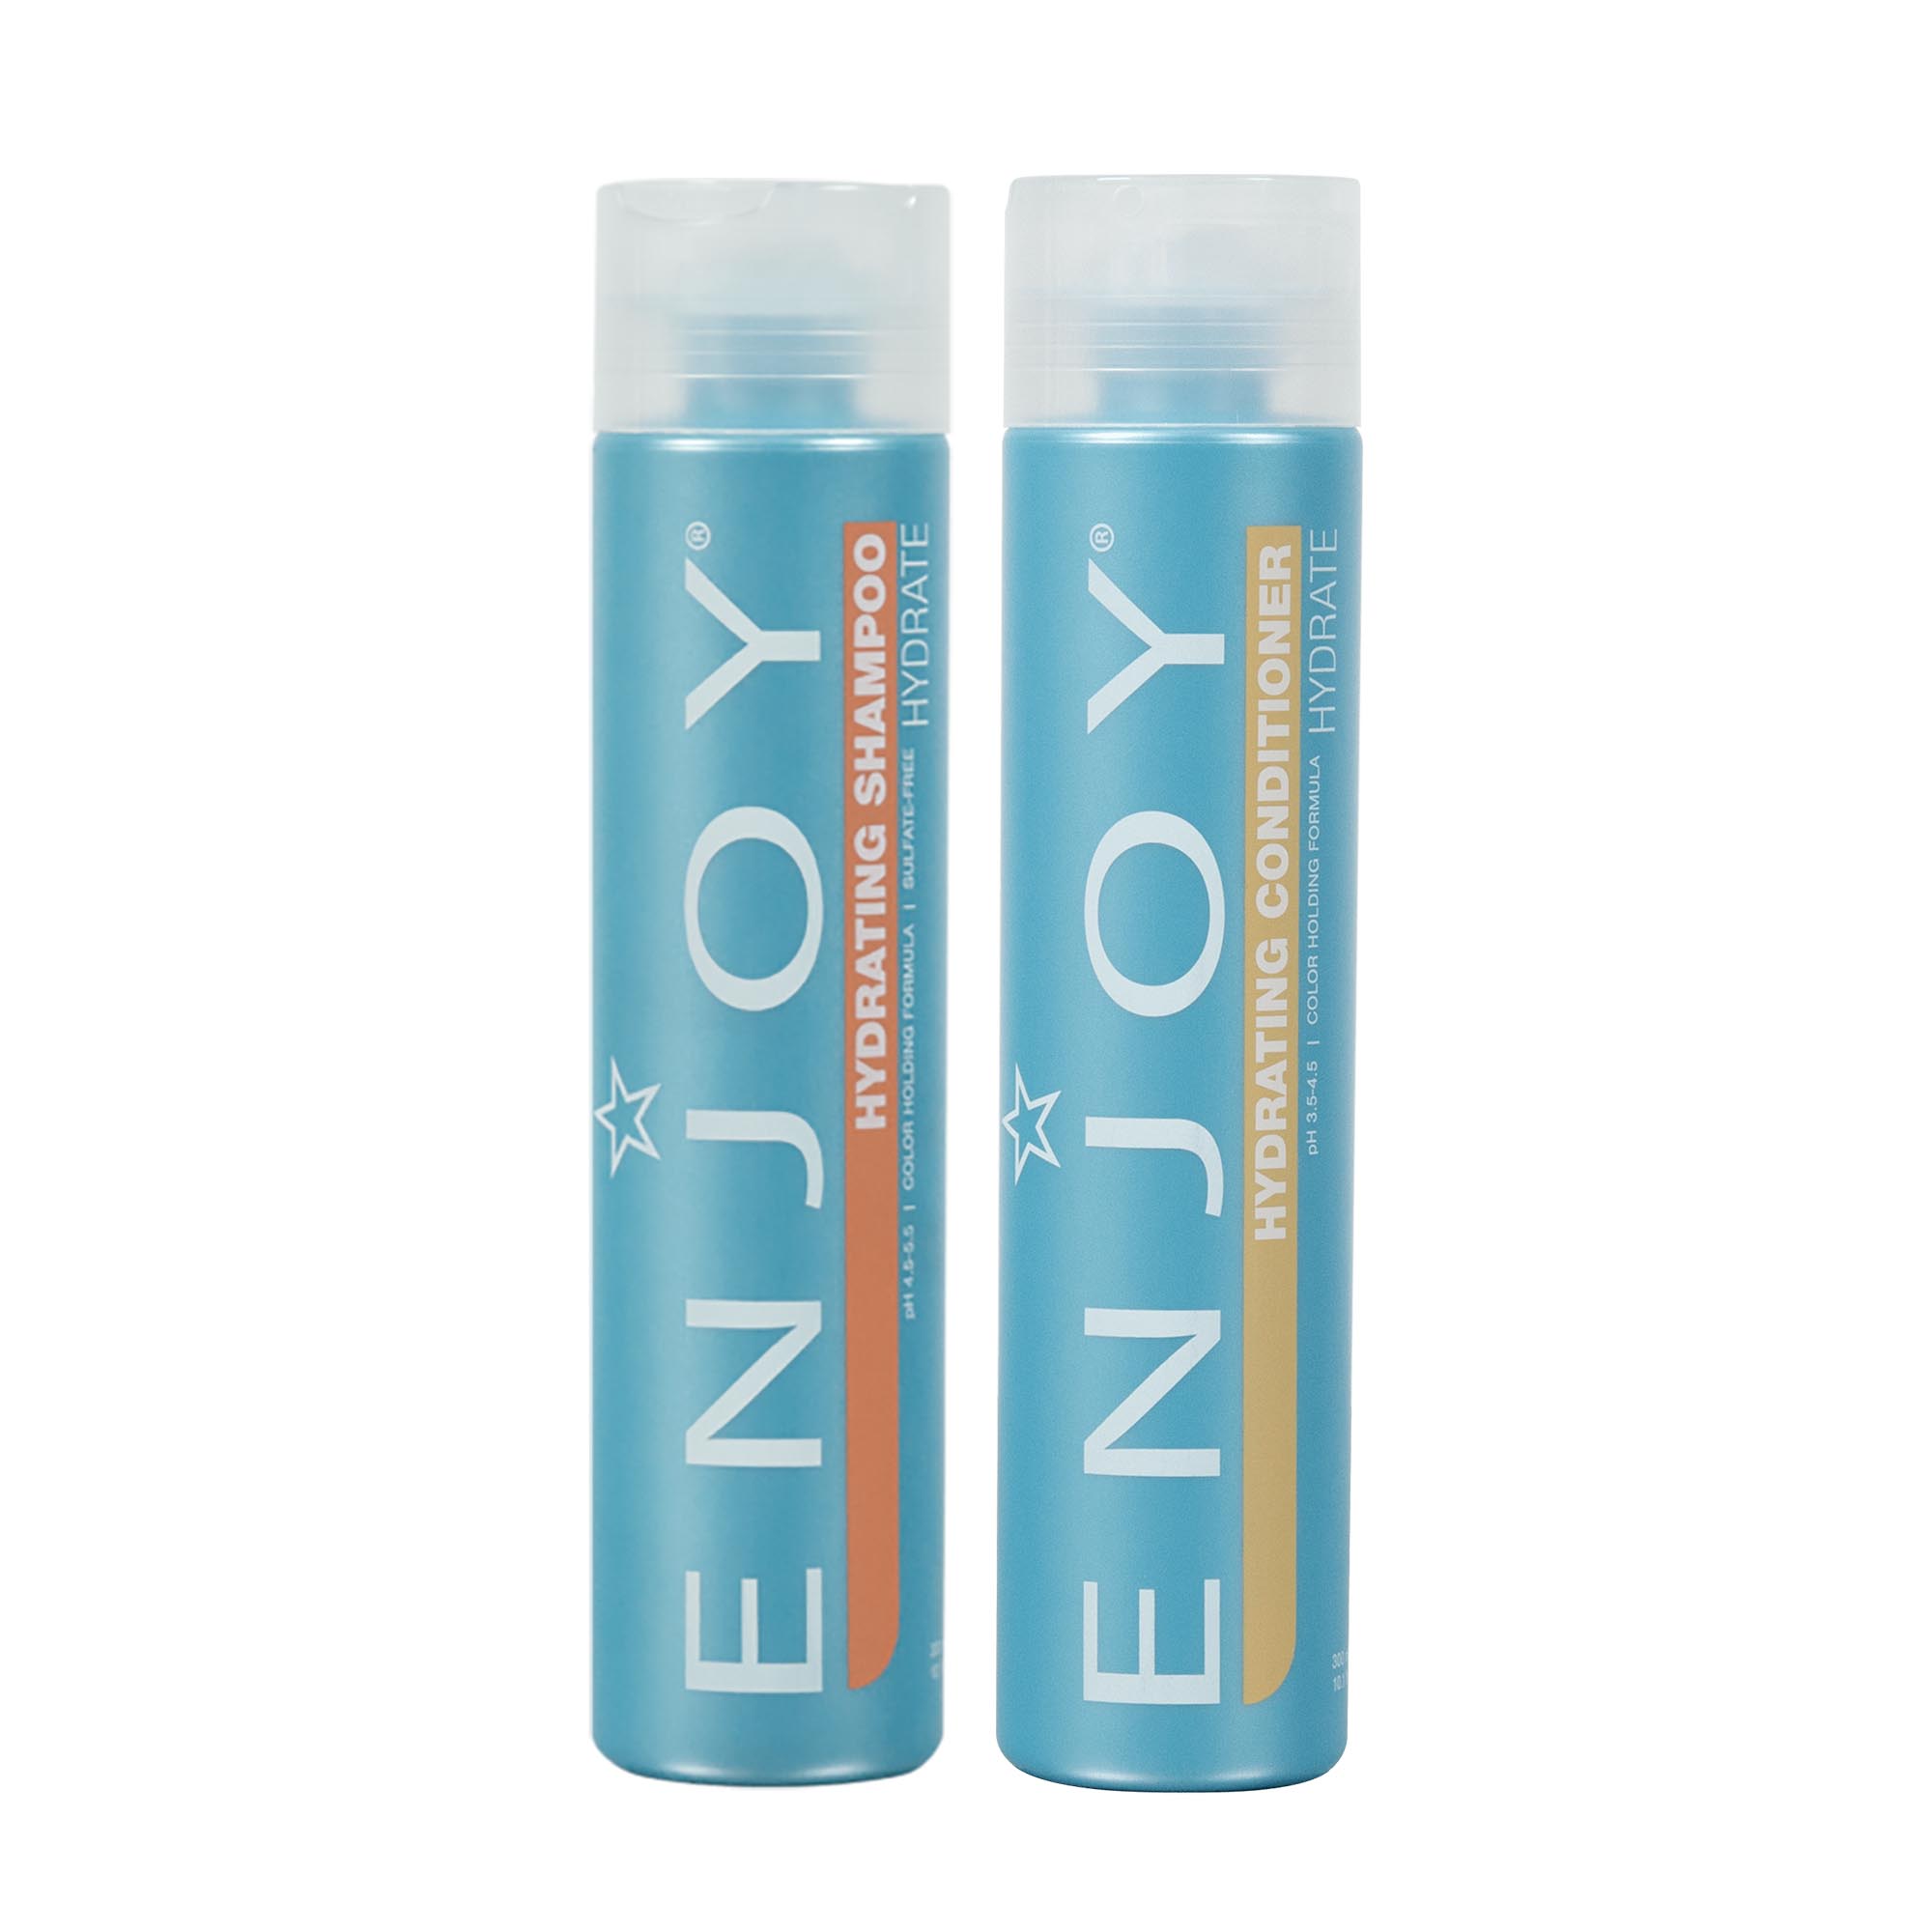 Enjoy Hydrate Hydrating Shampoo and Conditioner 10oz Duo ($47 Value) / 10 OZ